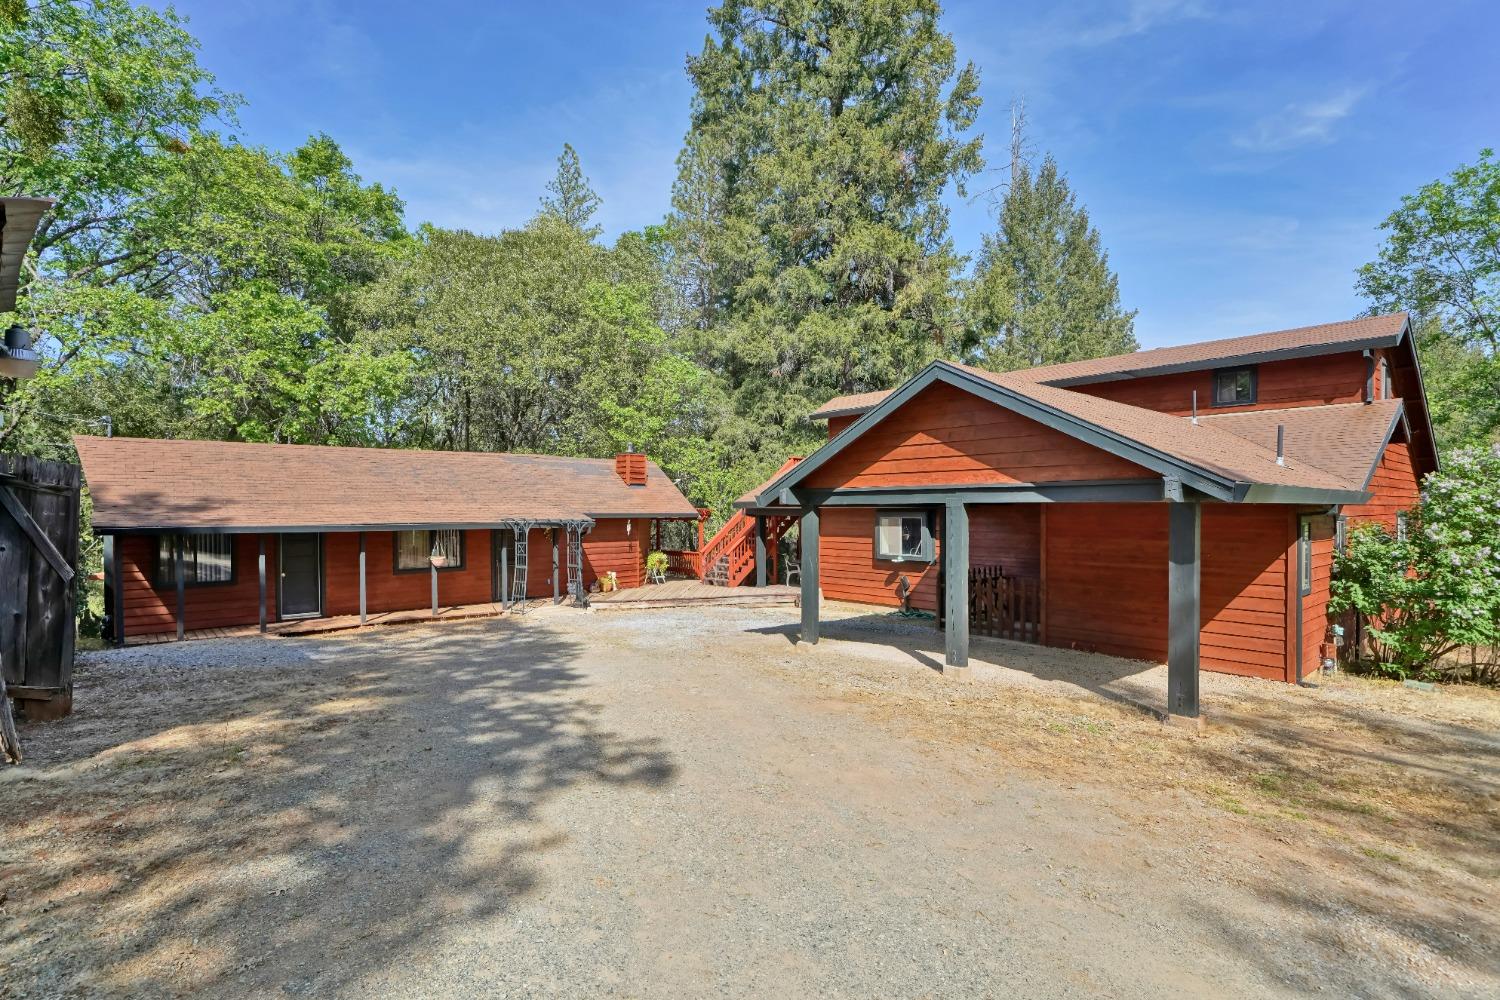 Sweat Equity will be key with this very private family compound. 2 small older homes are livable while you build your dream home. Several view spots to choose. Large poll barn for storage as well as Large barn/garage and outbuildings. Very special and private location. Only 20 minutes to Placerville and there is everything you need in town just minutes away.